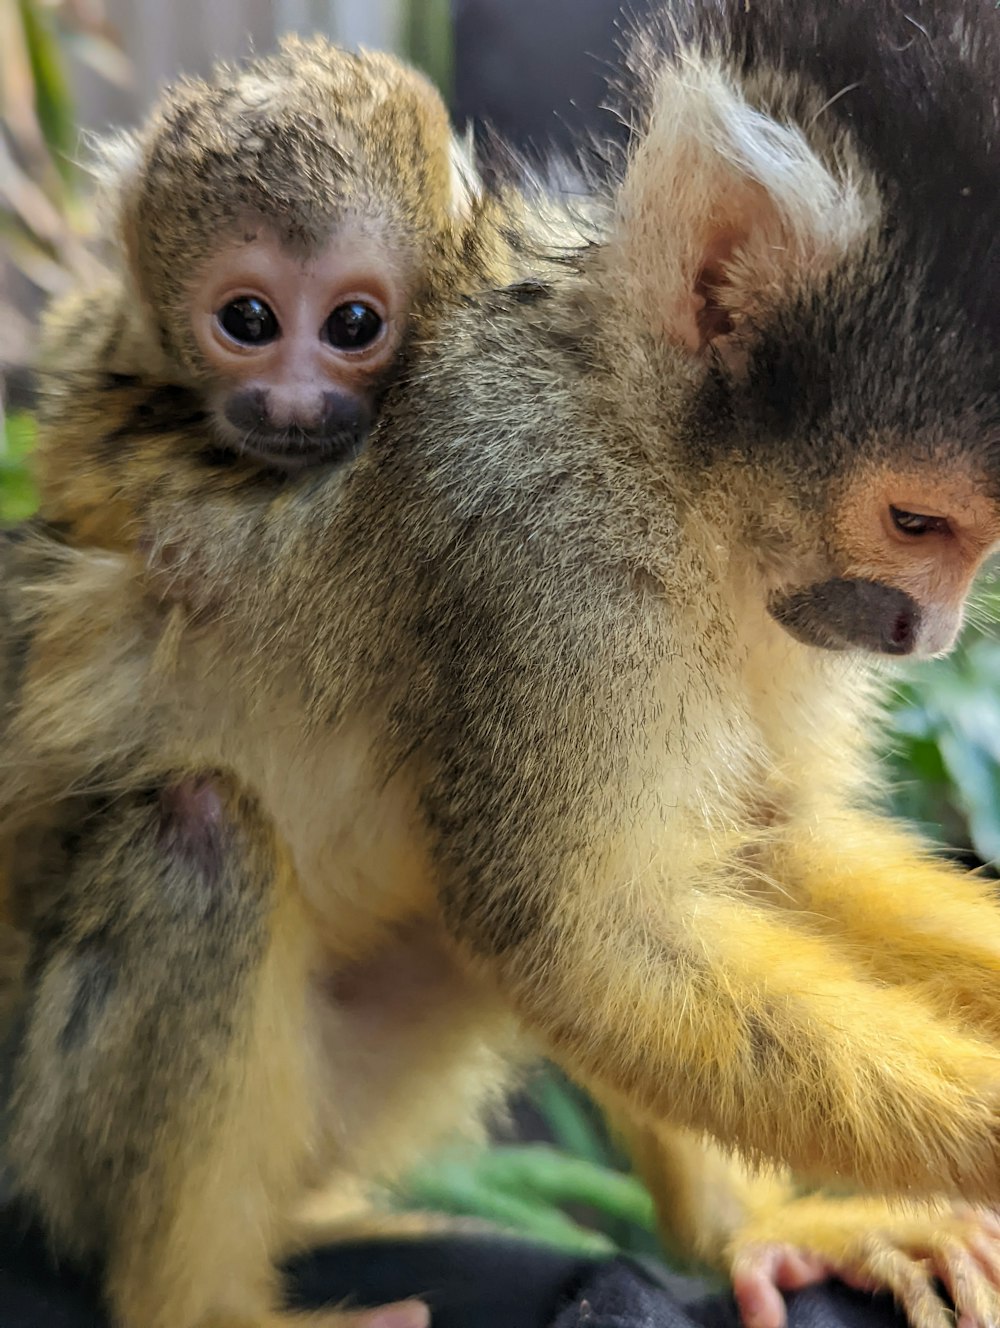 a small monkey sitting on top of a person's arm